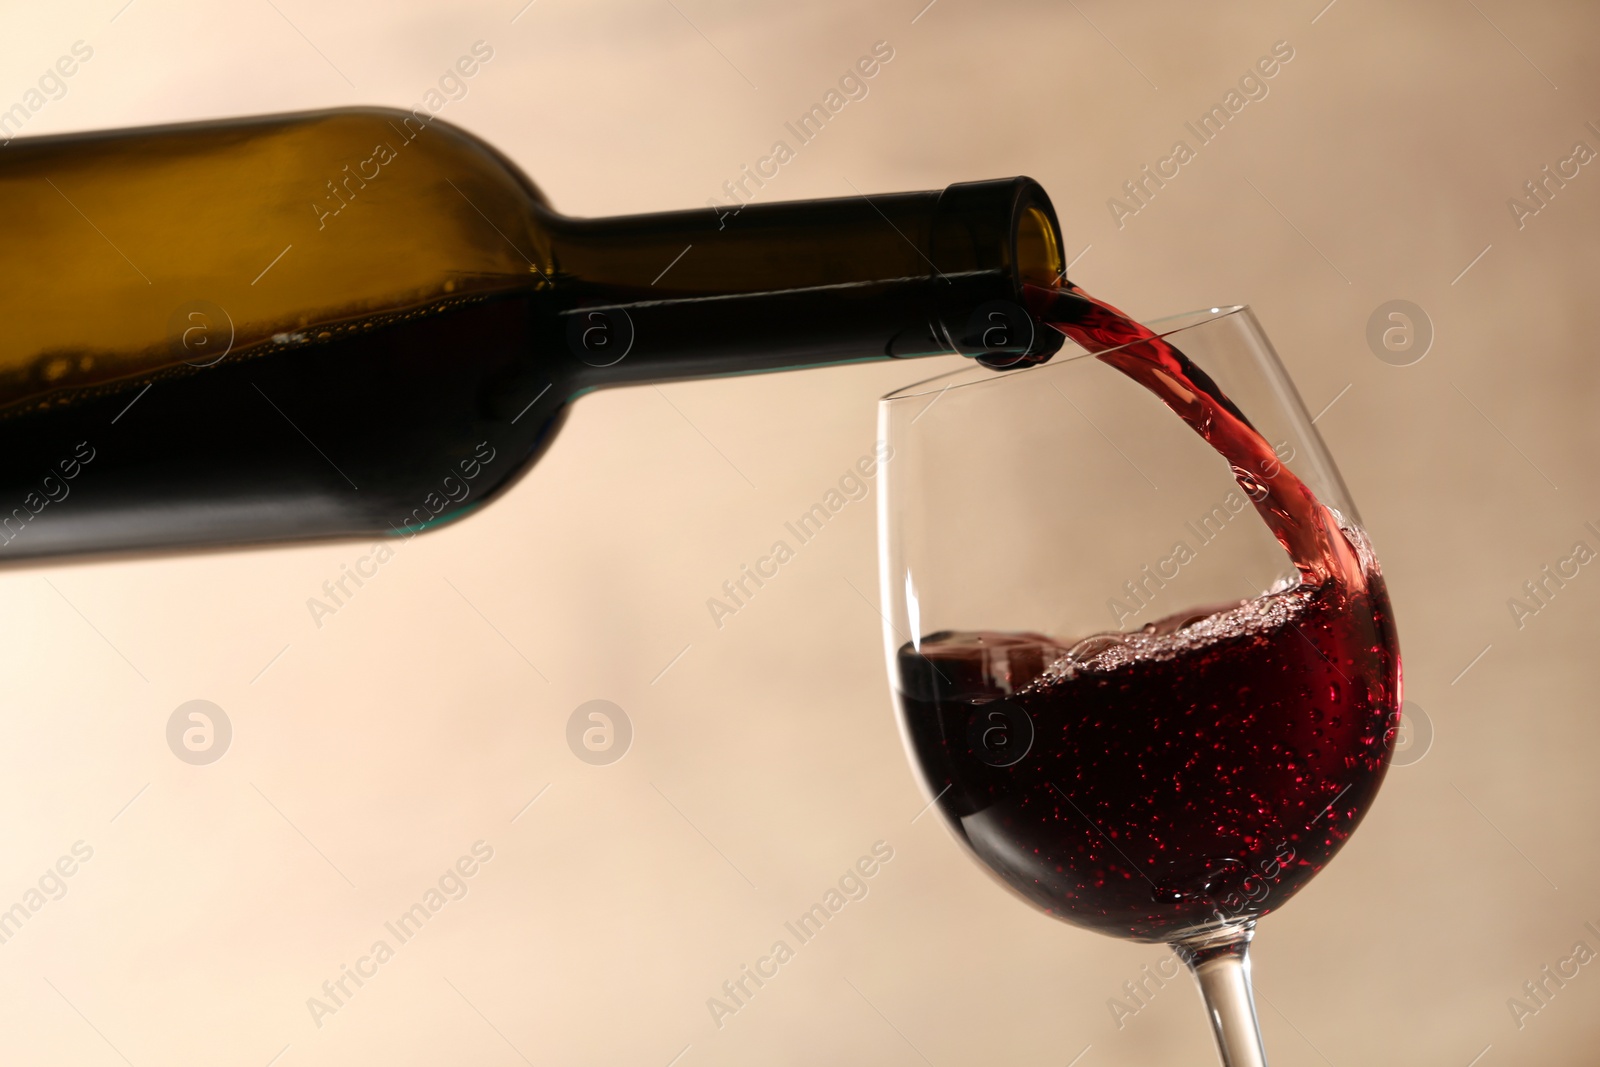 Photo of Pouring red wine into glass from bottle against blurred beige background, closeup